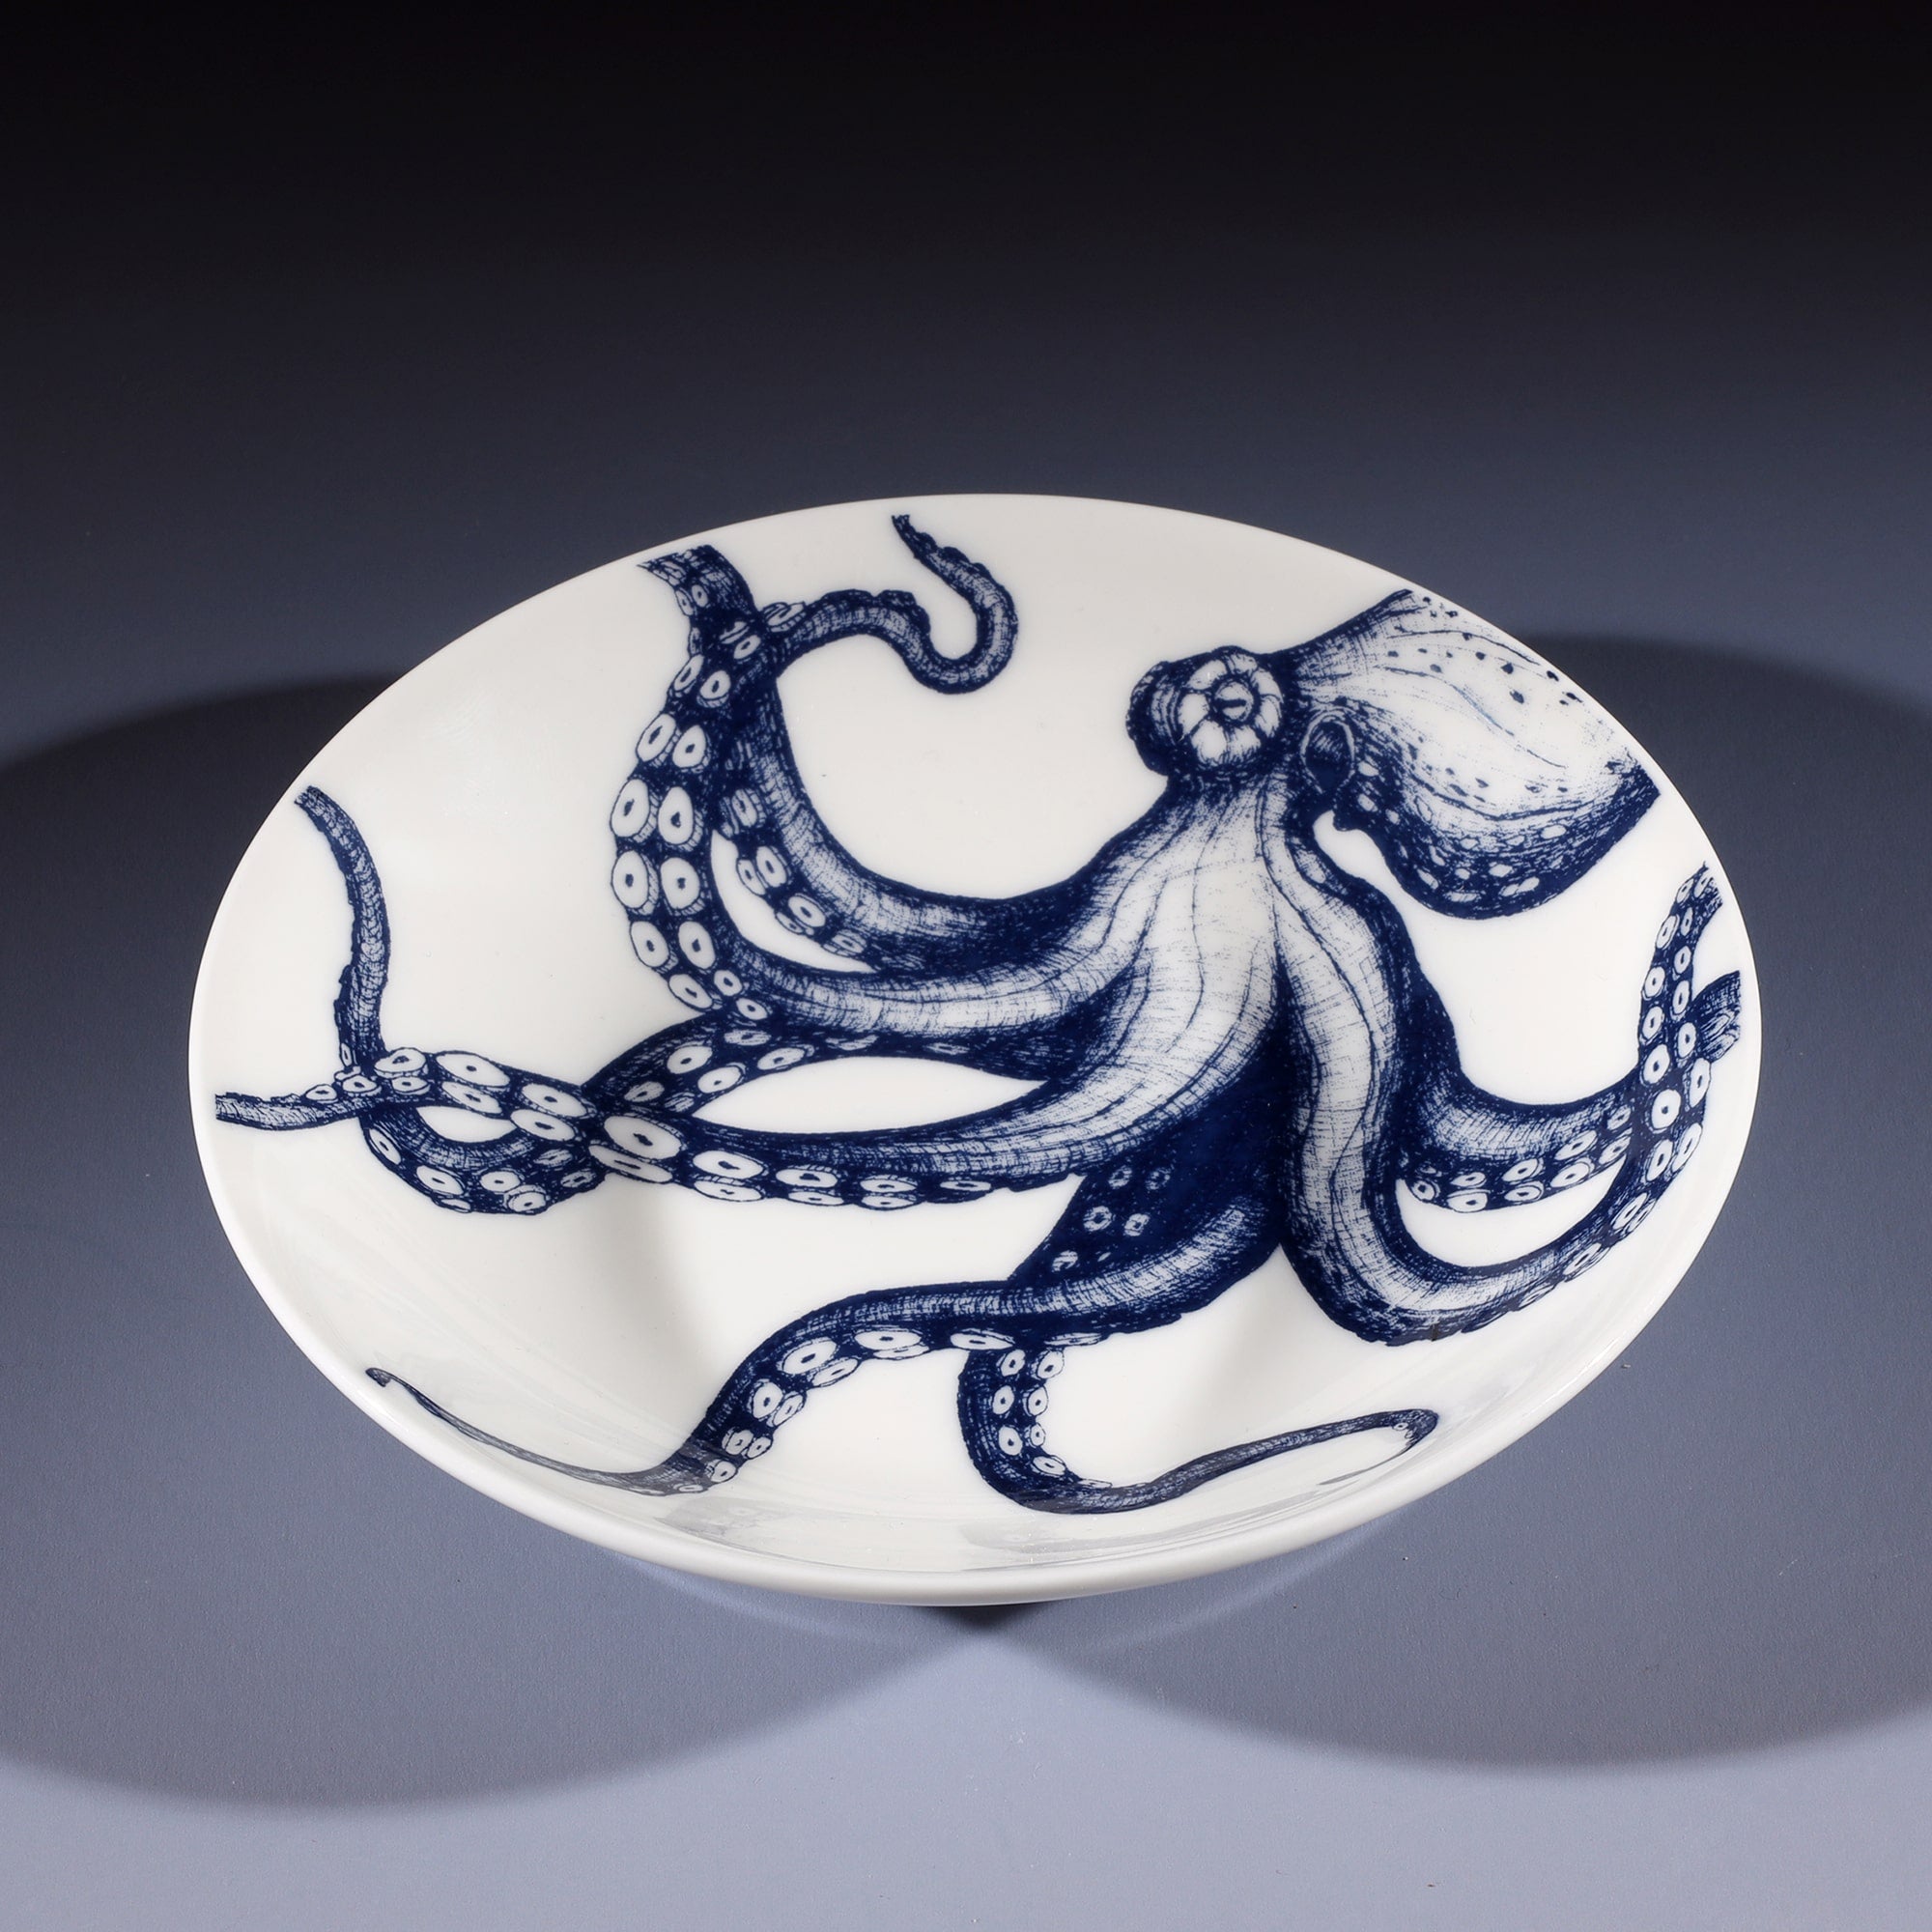 Nibbles bowl in Bone China in our Classic range in Navy and white in the Octopus design